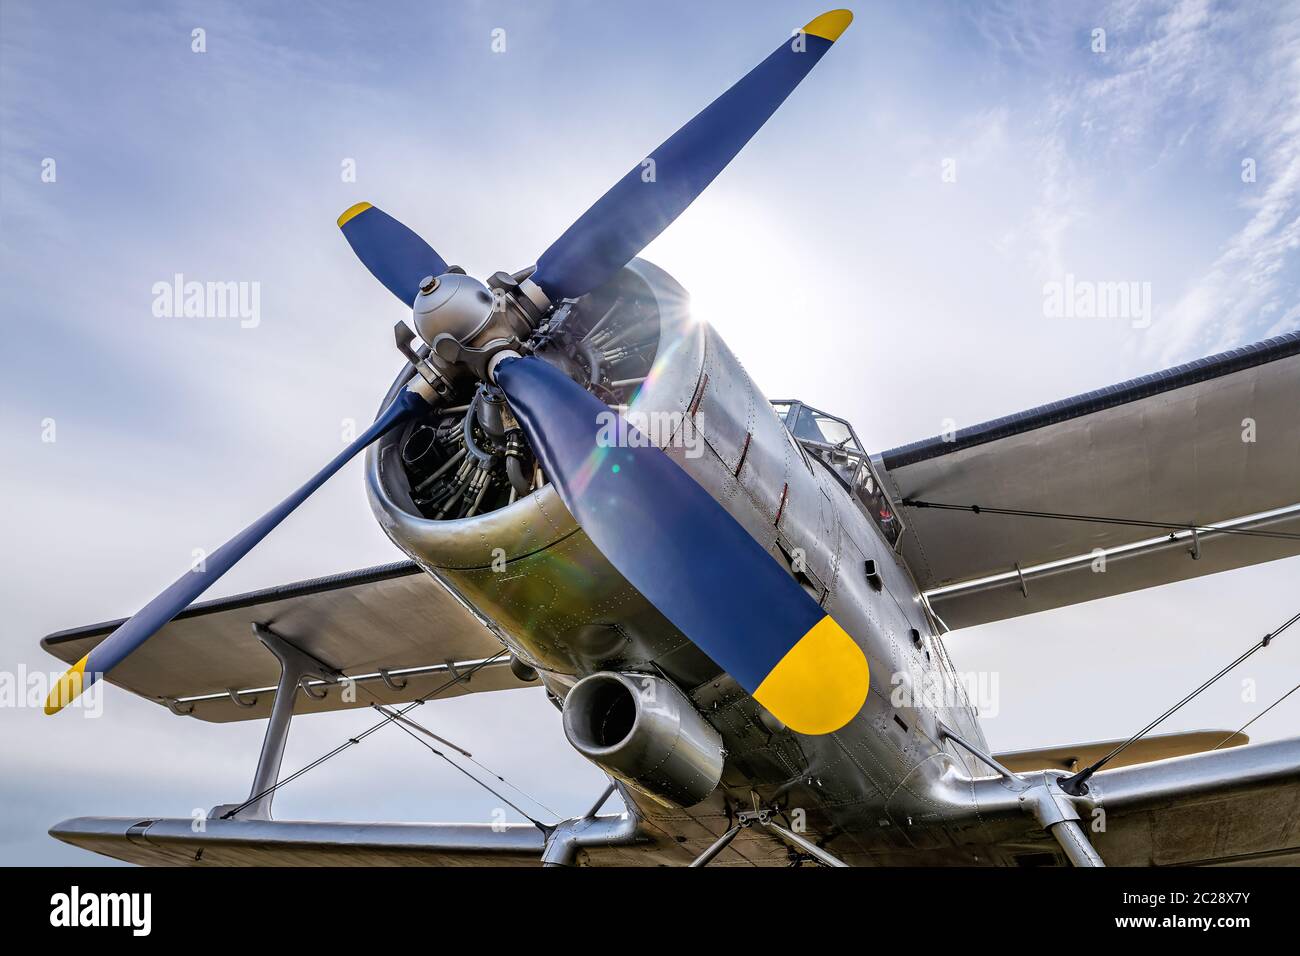 propeller of an historic aircraft against asunny sky Stock Photo